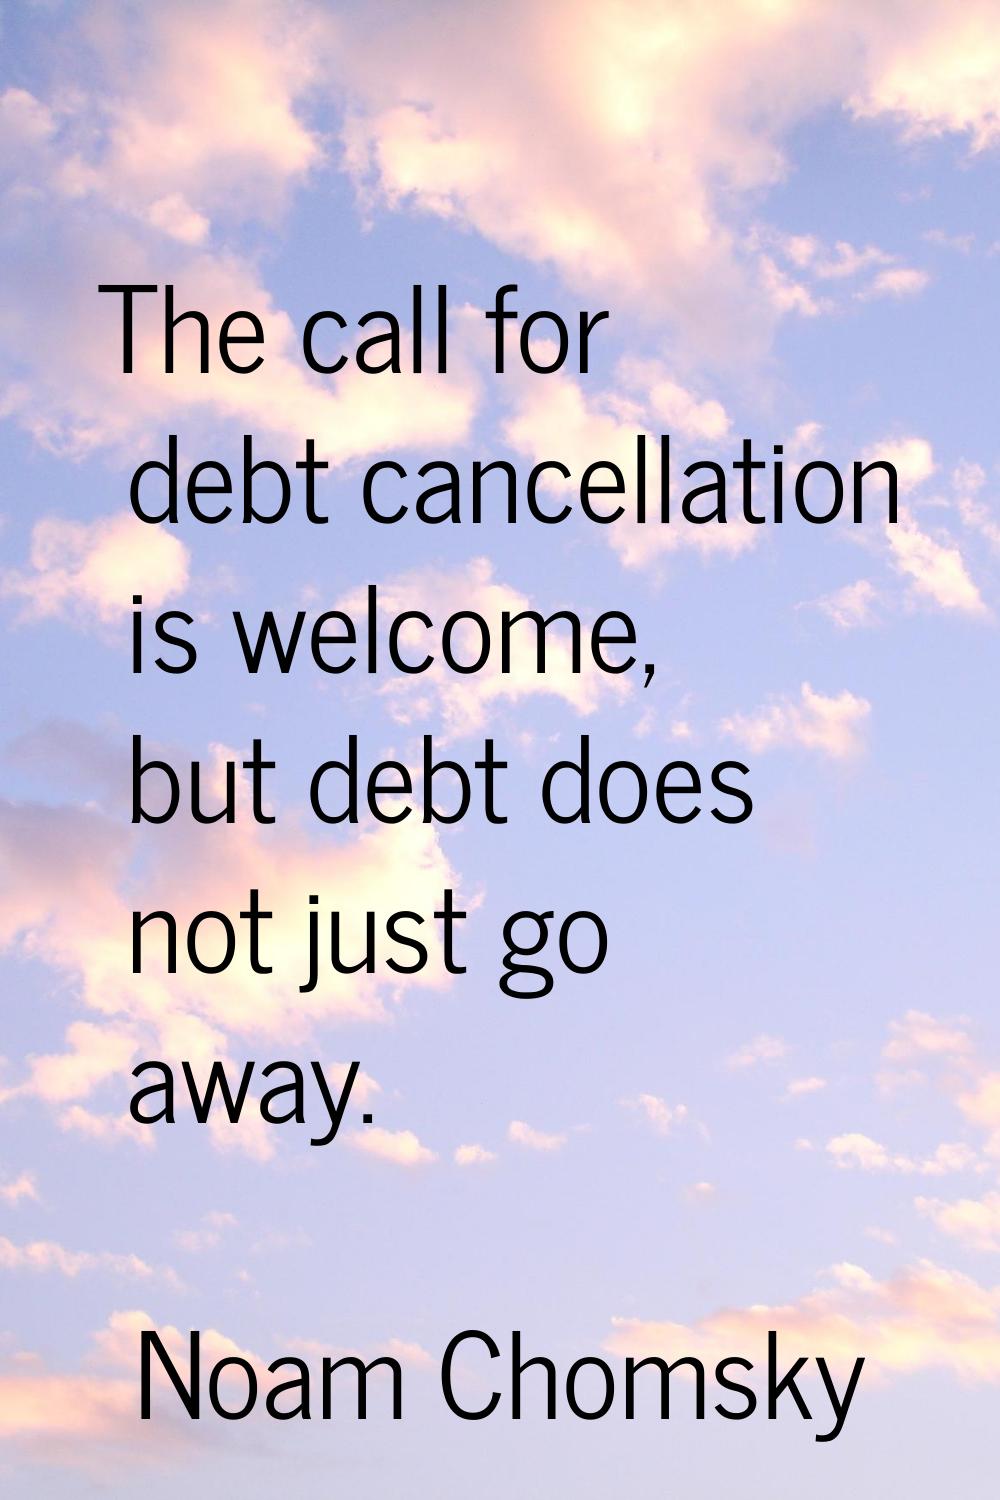 The call for debt cancellation is welcome, but debt does not just go away.